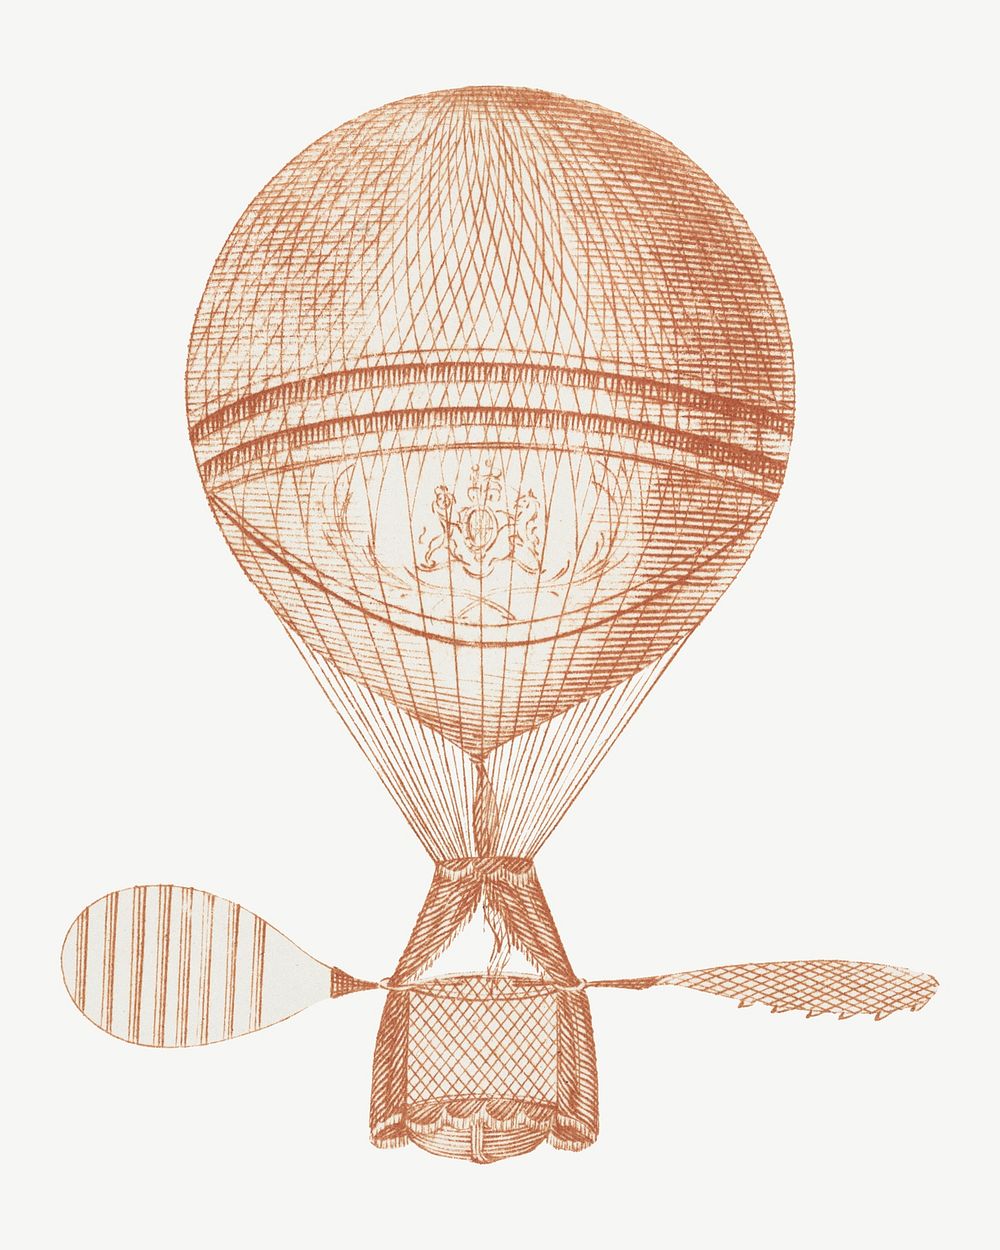 Hot air balloon, vintage illustration by Vincent Lunardi psd. Remixed by rawpixel.